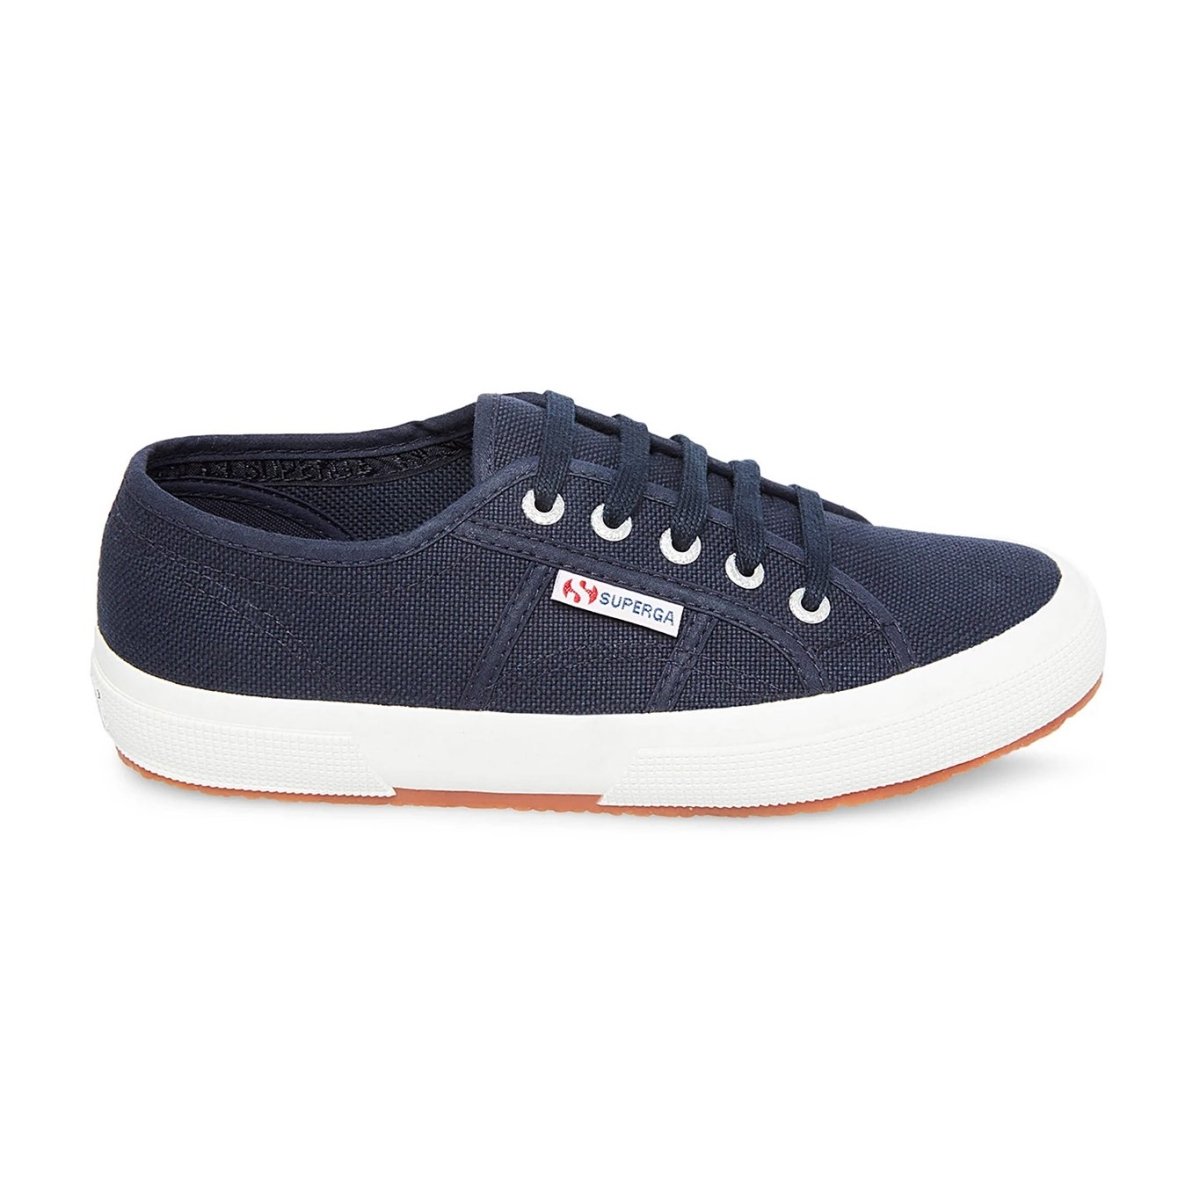 Superga Women's 2750 Classic Navy Canvas - Tip Top Shoes of New York